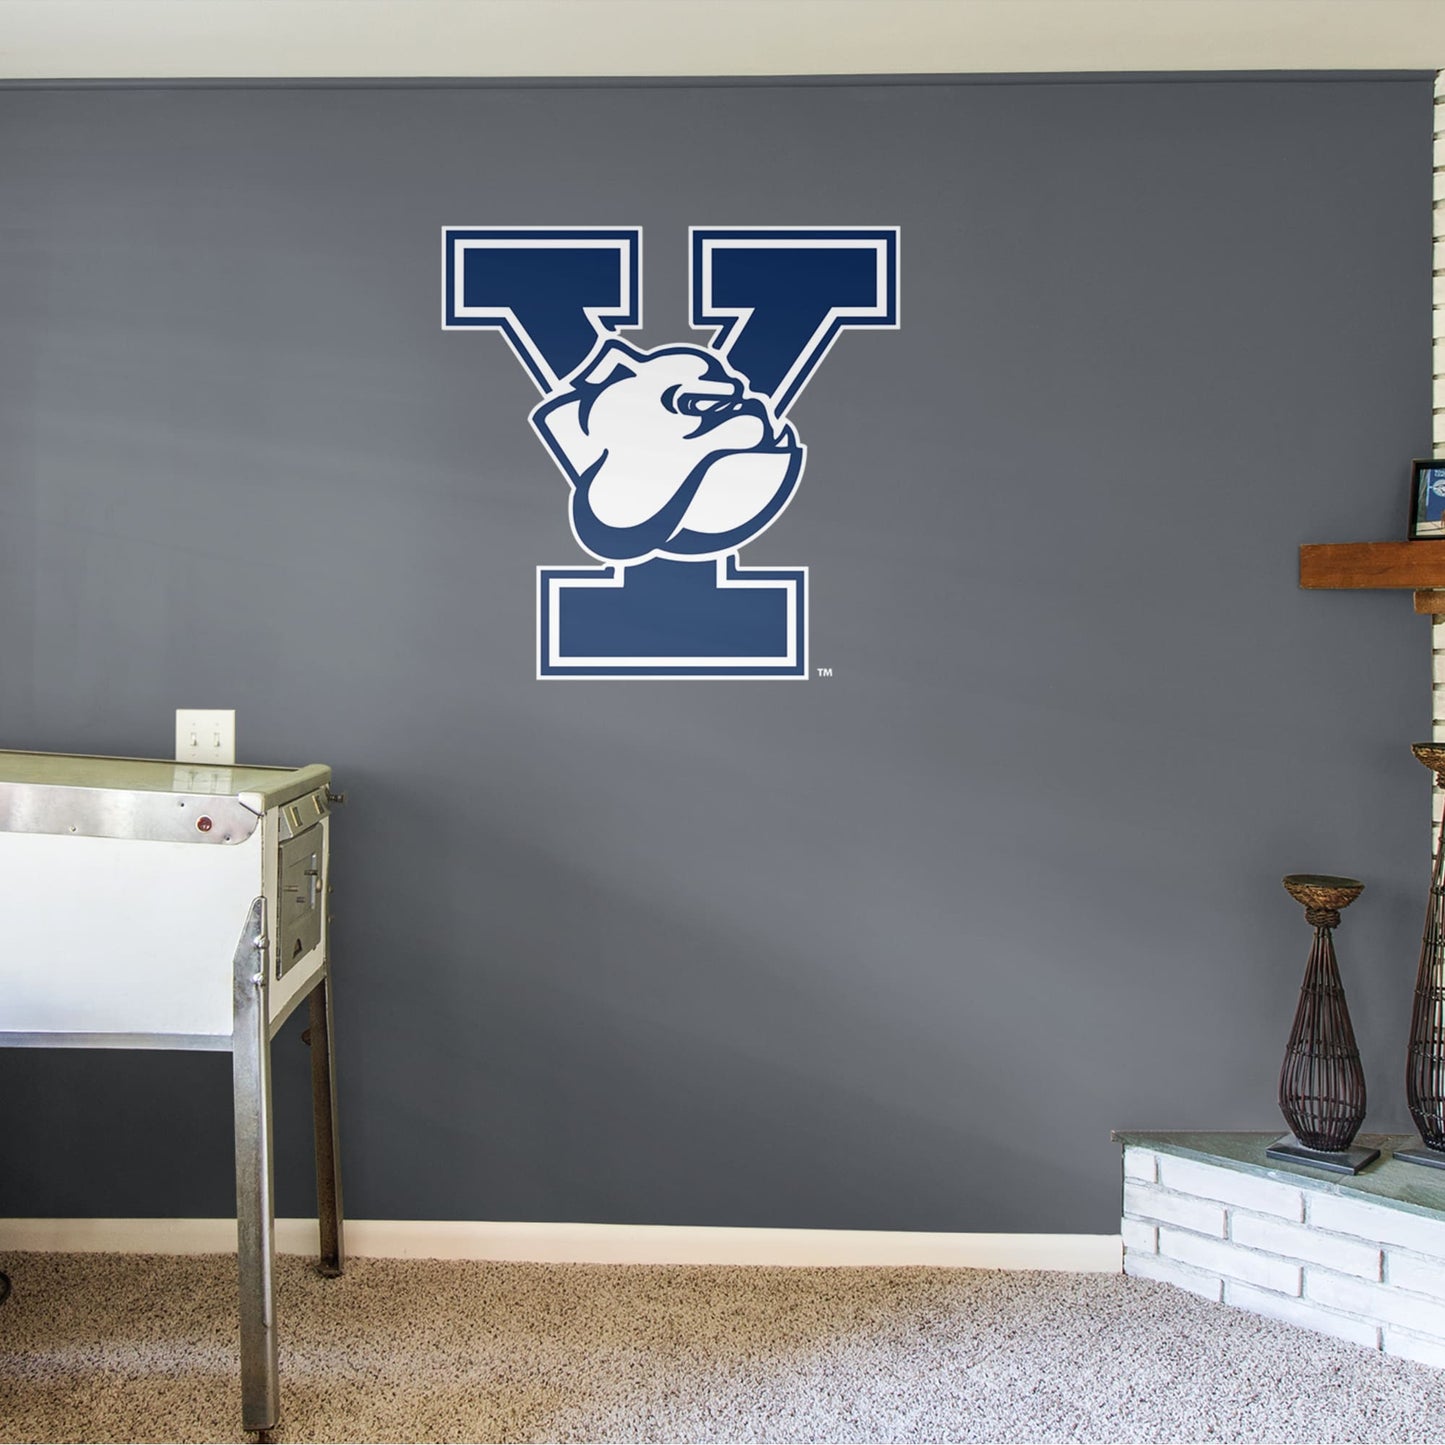 Yale Bulldogs: Logo - Officially Licensed Removable Wall Decal